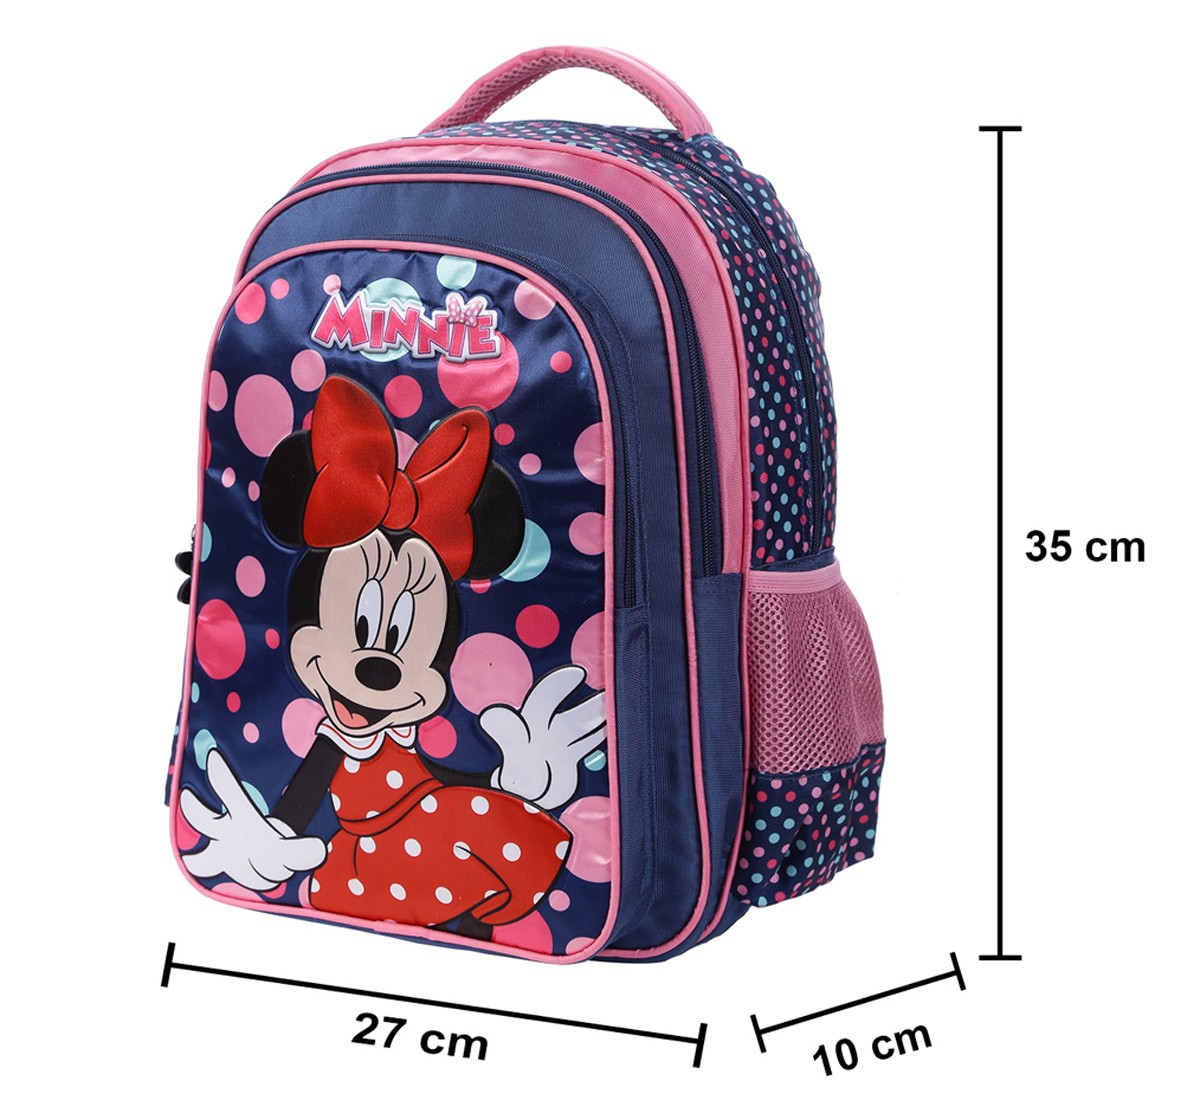 Simba Minnie Be Fabulouse 14 Backpack Multicolor 3Y+